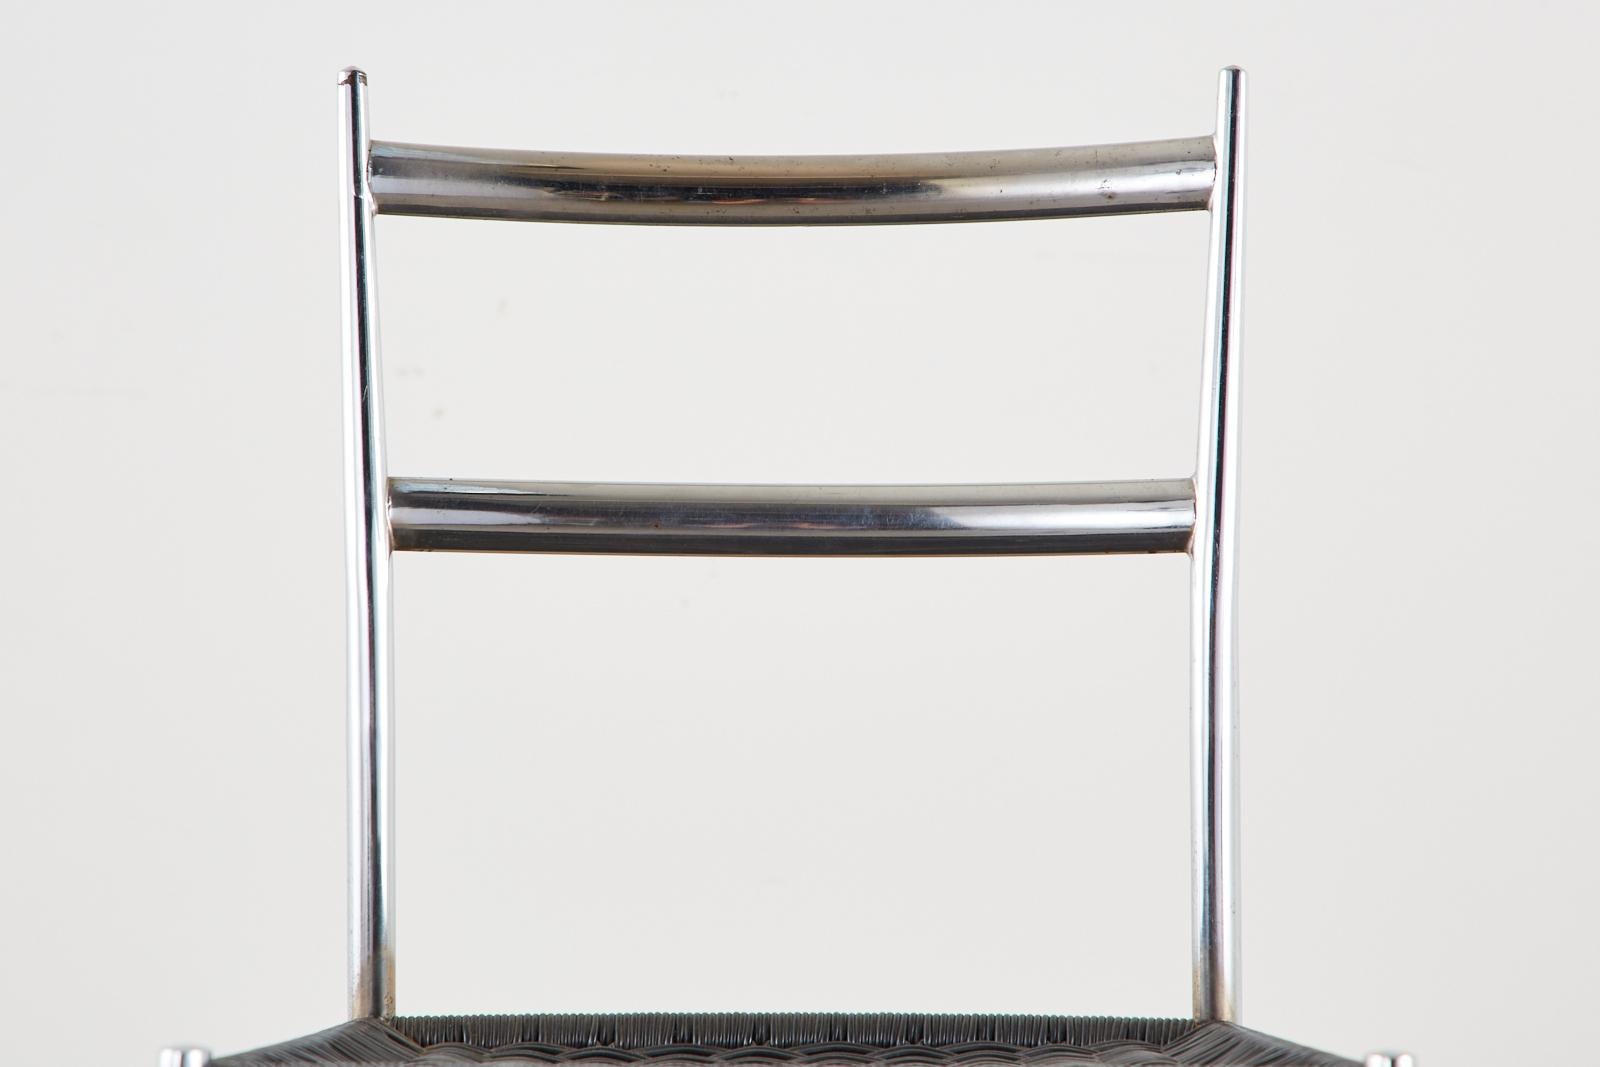 Set of Four Chrome Dining Chairs, style of Gio Ponti's 